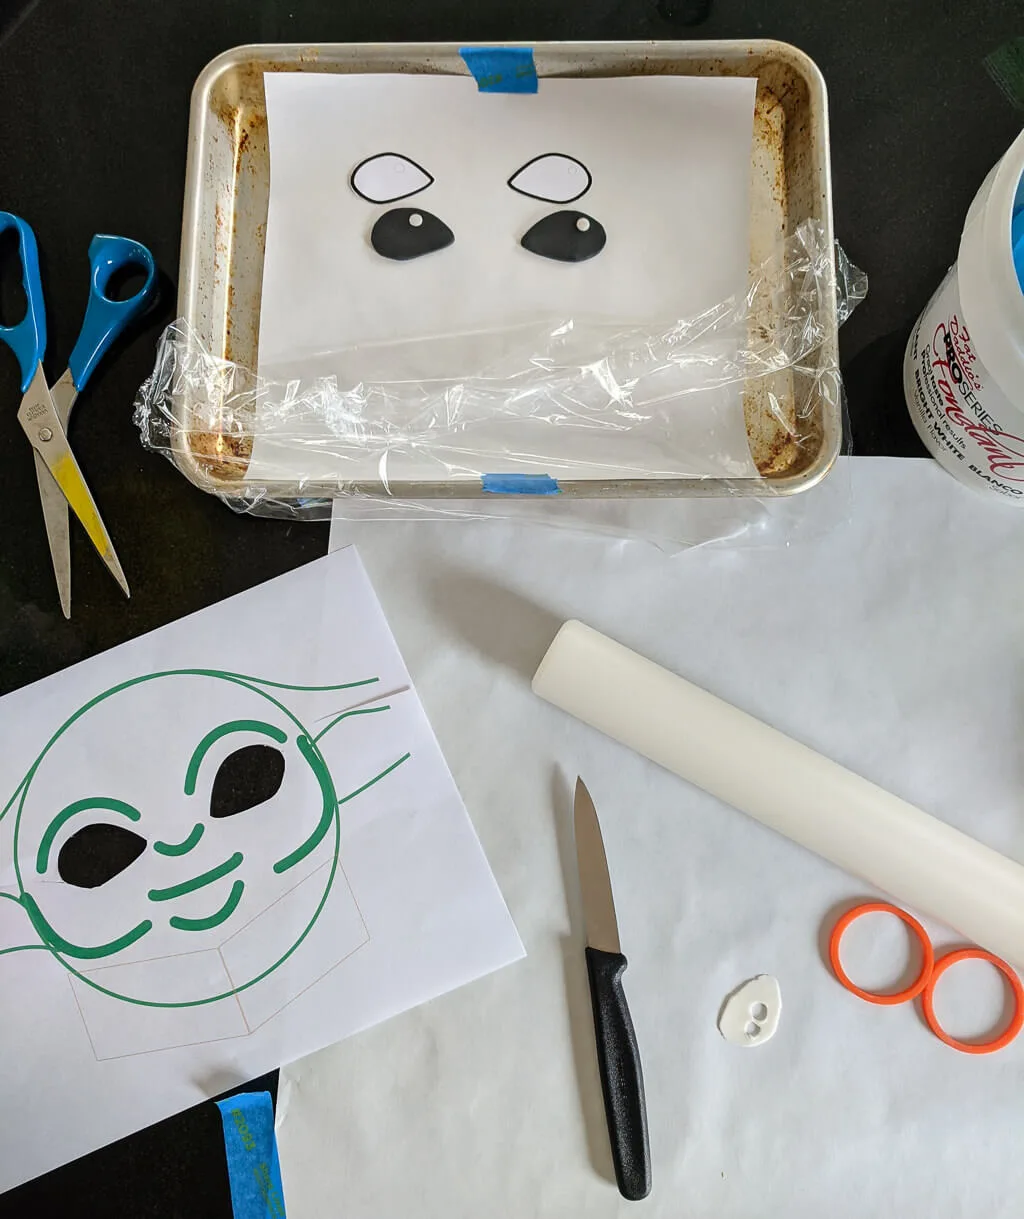 Fondant eyes and printable template for making a DIY Baby Yoda cake